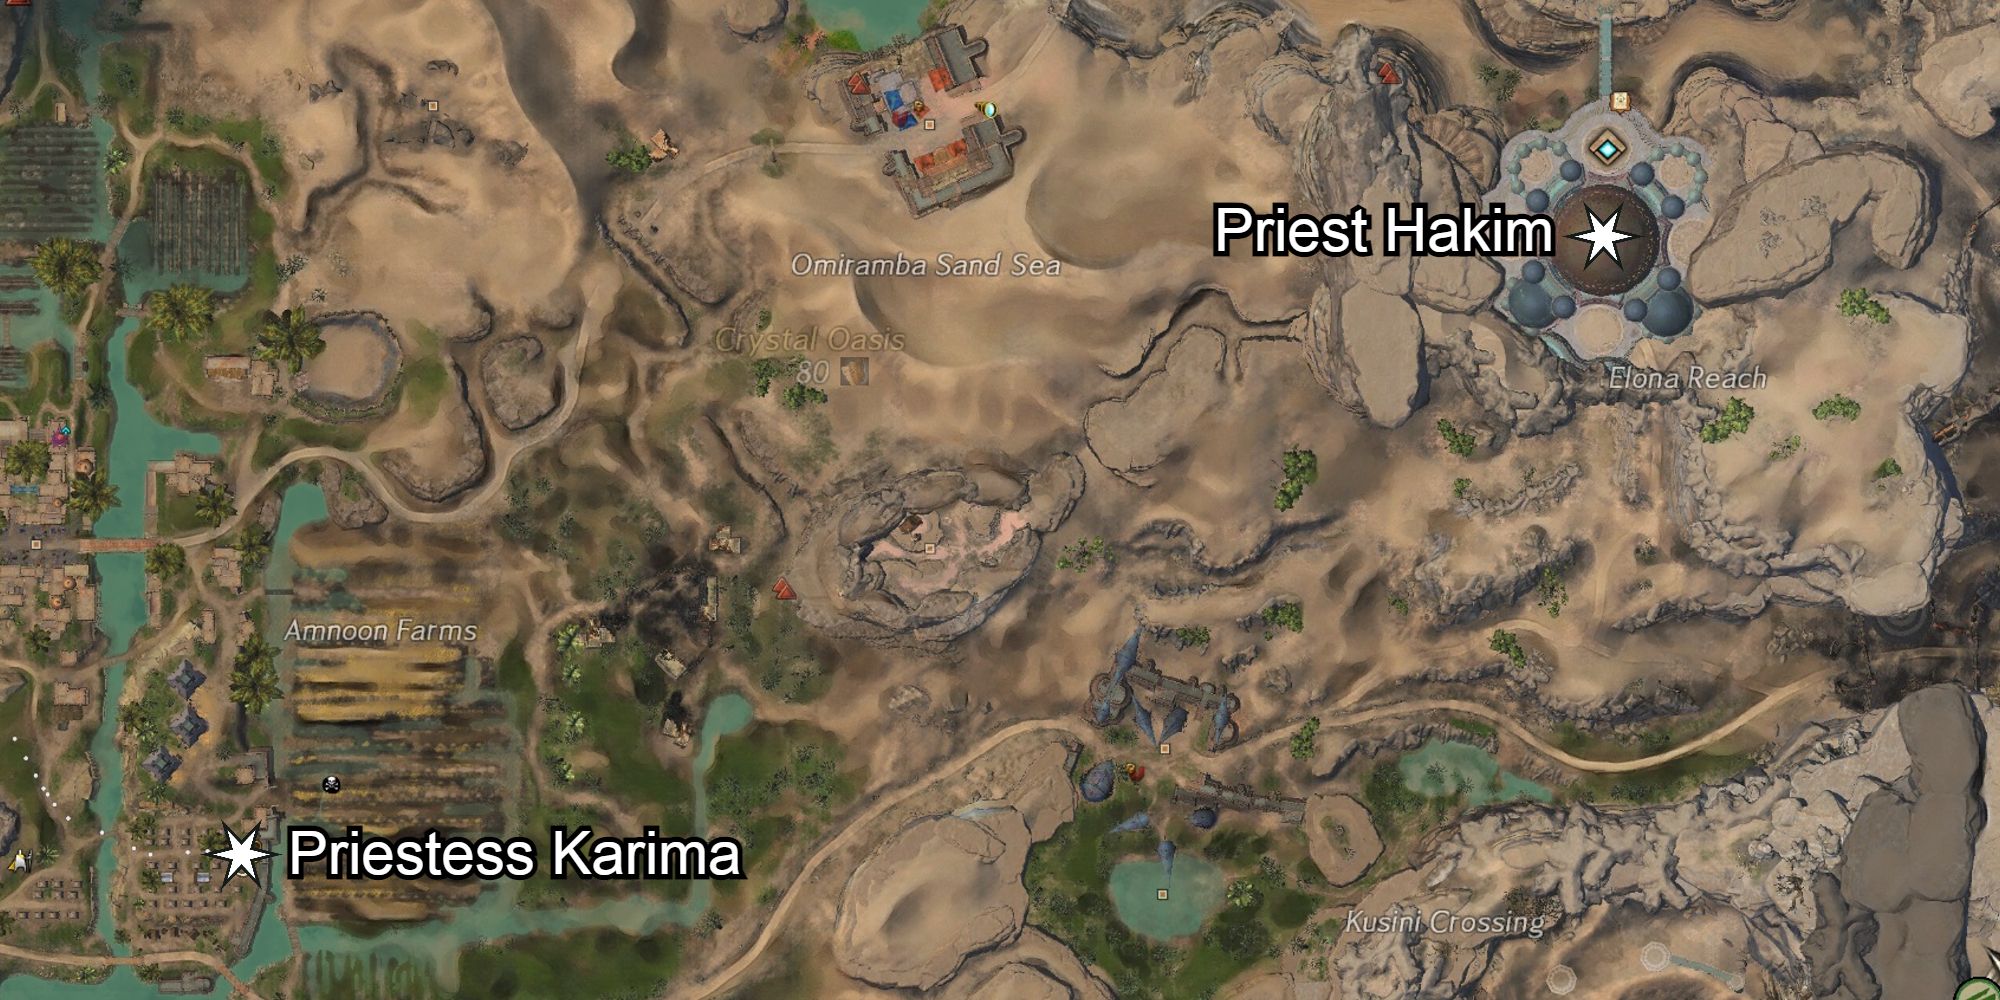 locations of priestess karima and priest hakim on map of crystal oasis